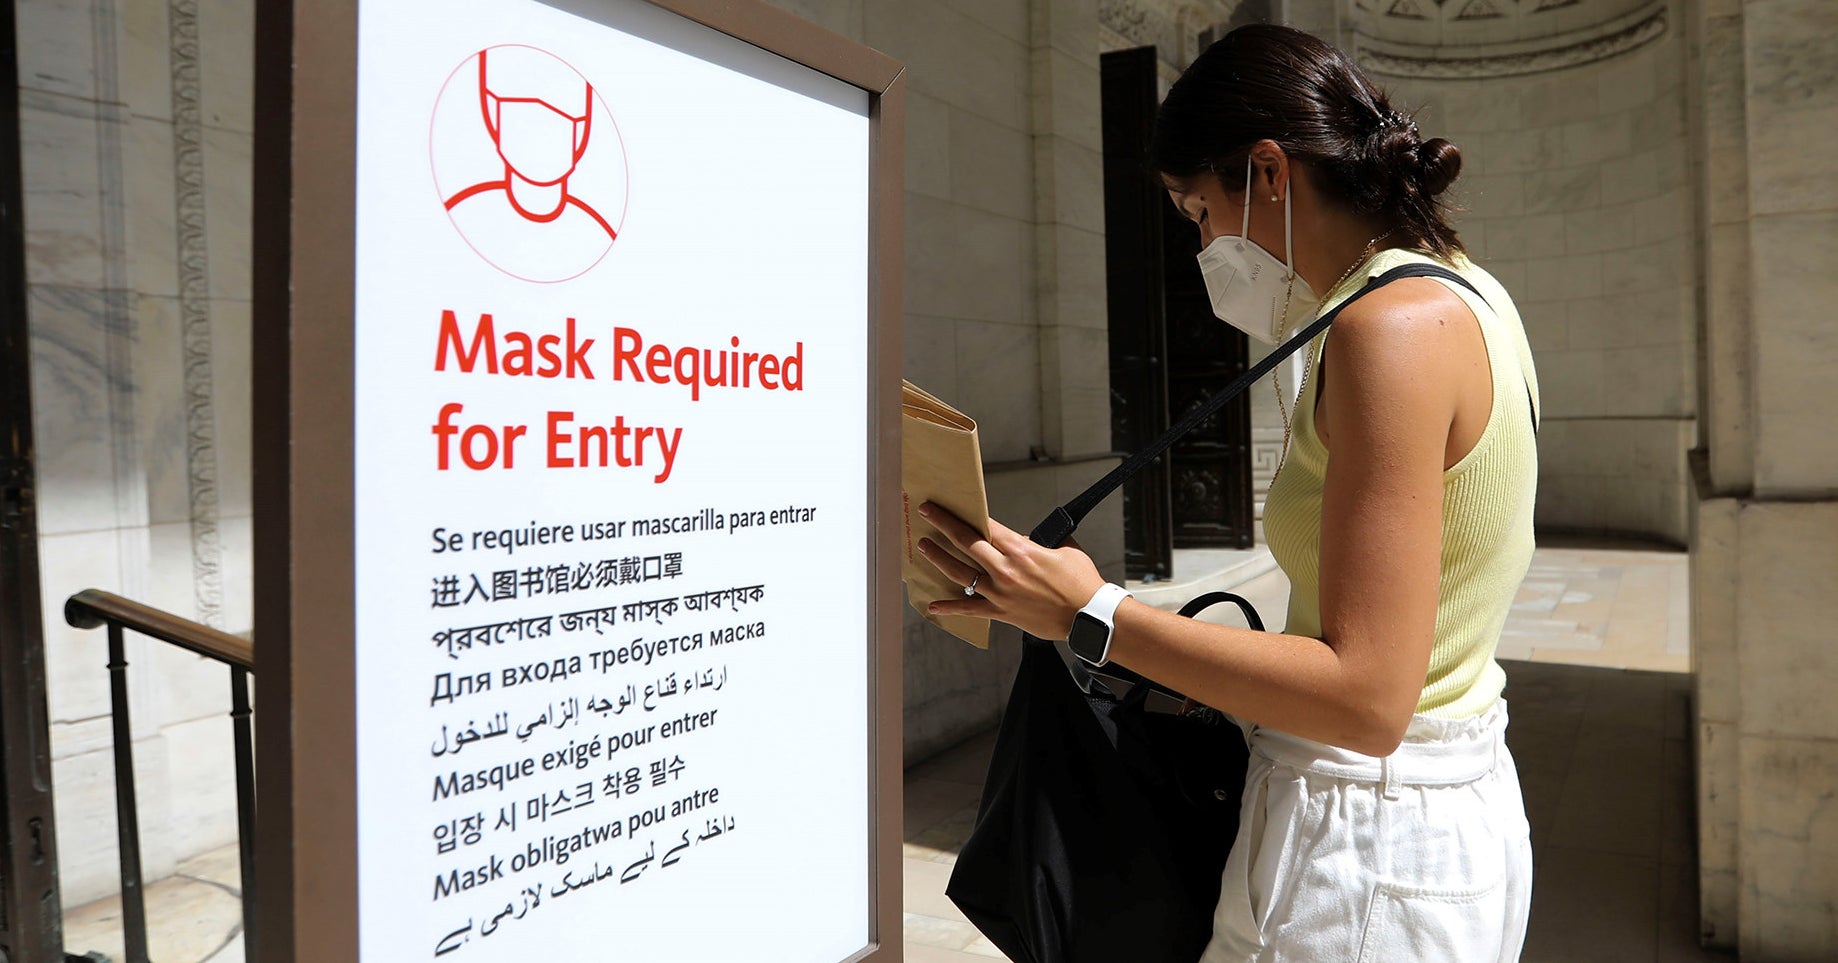 That Viral Op-Ed About Masks Is Based On Flawed Research, Frustrated Experts Say